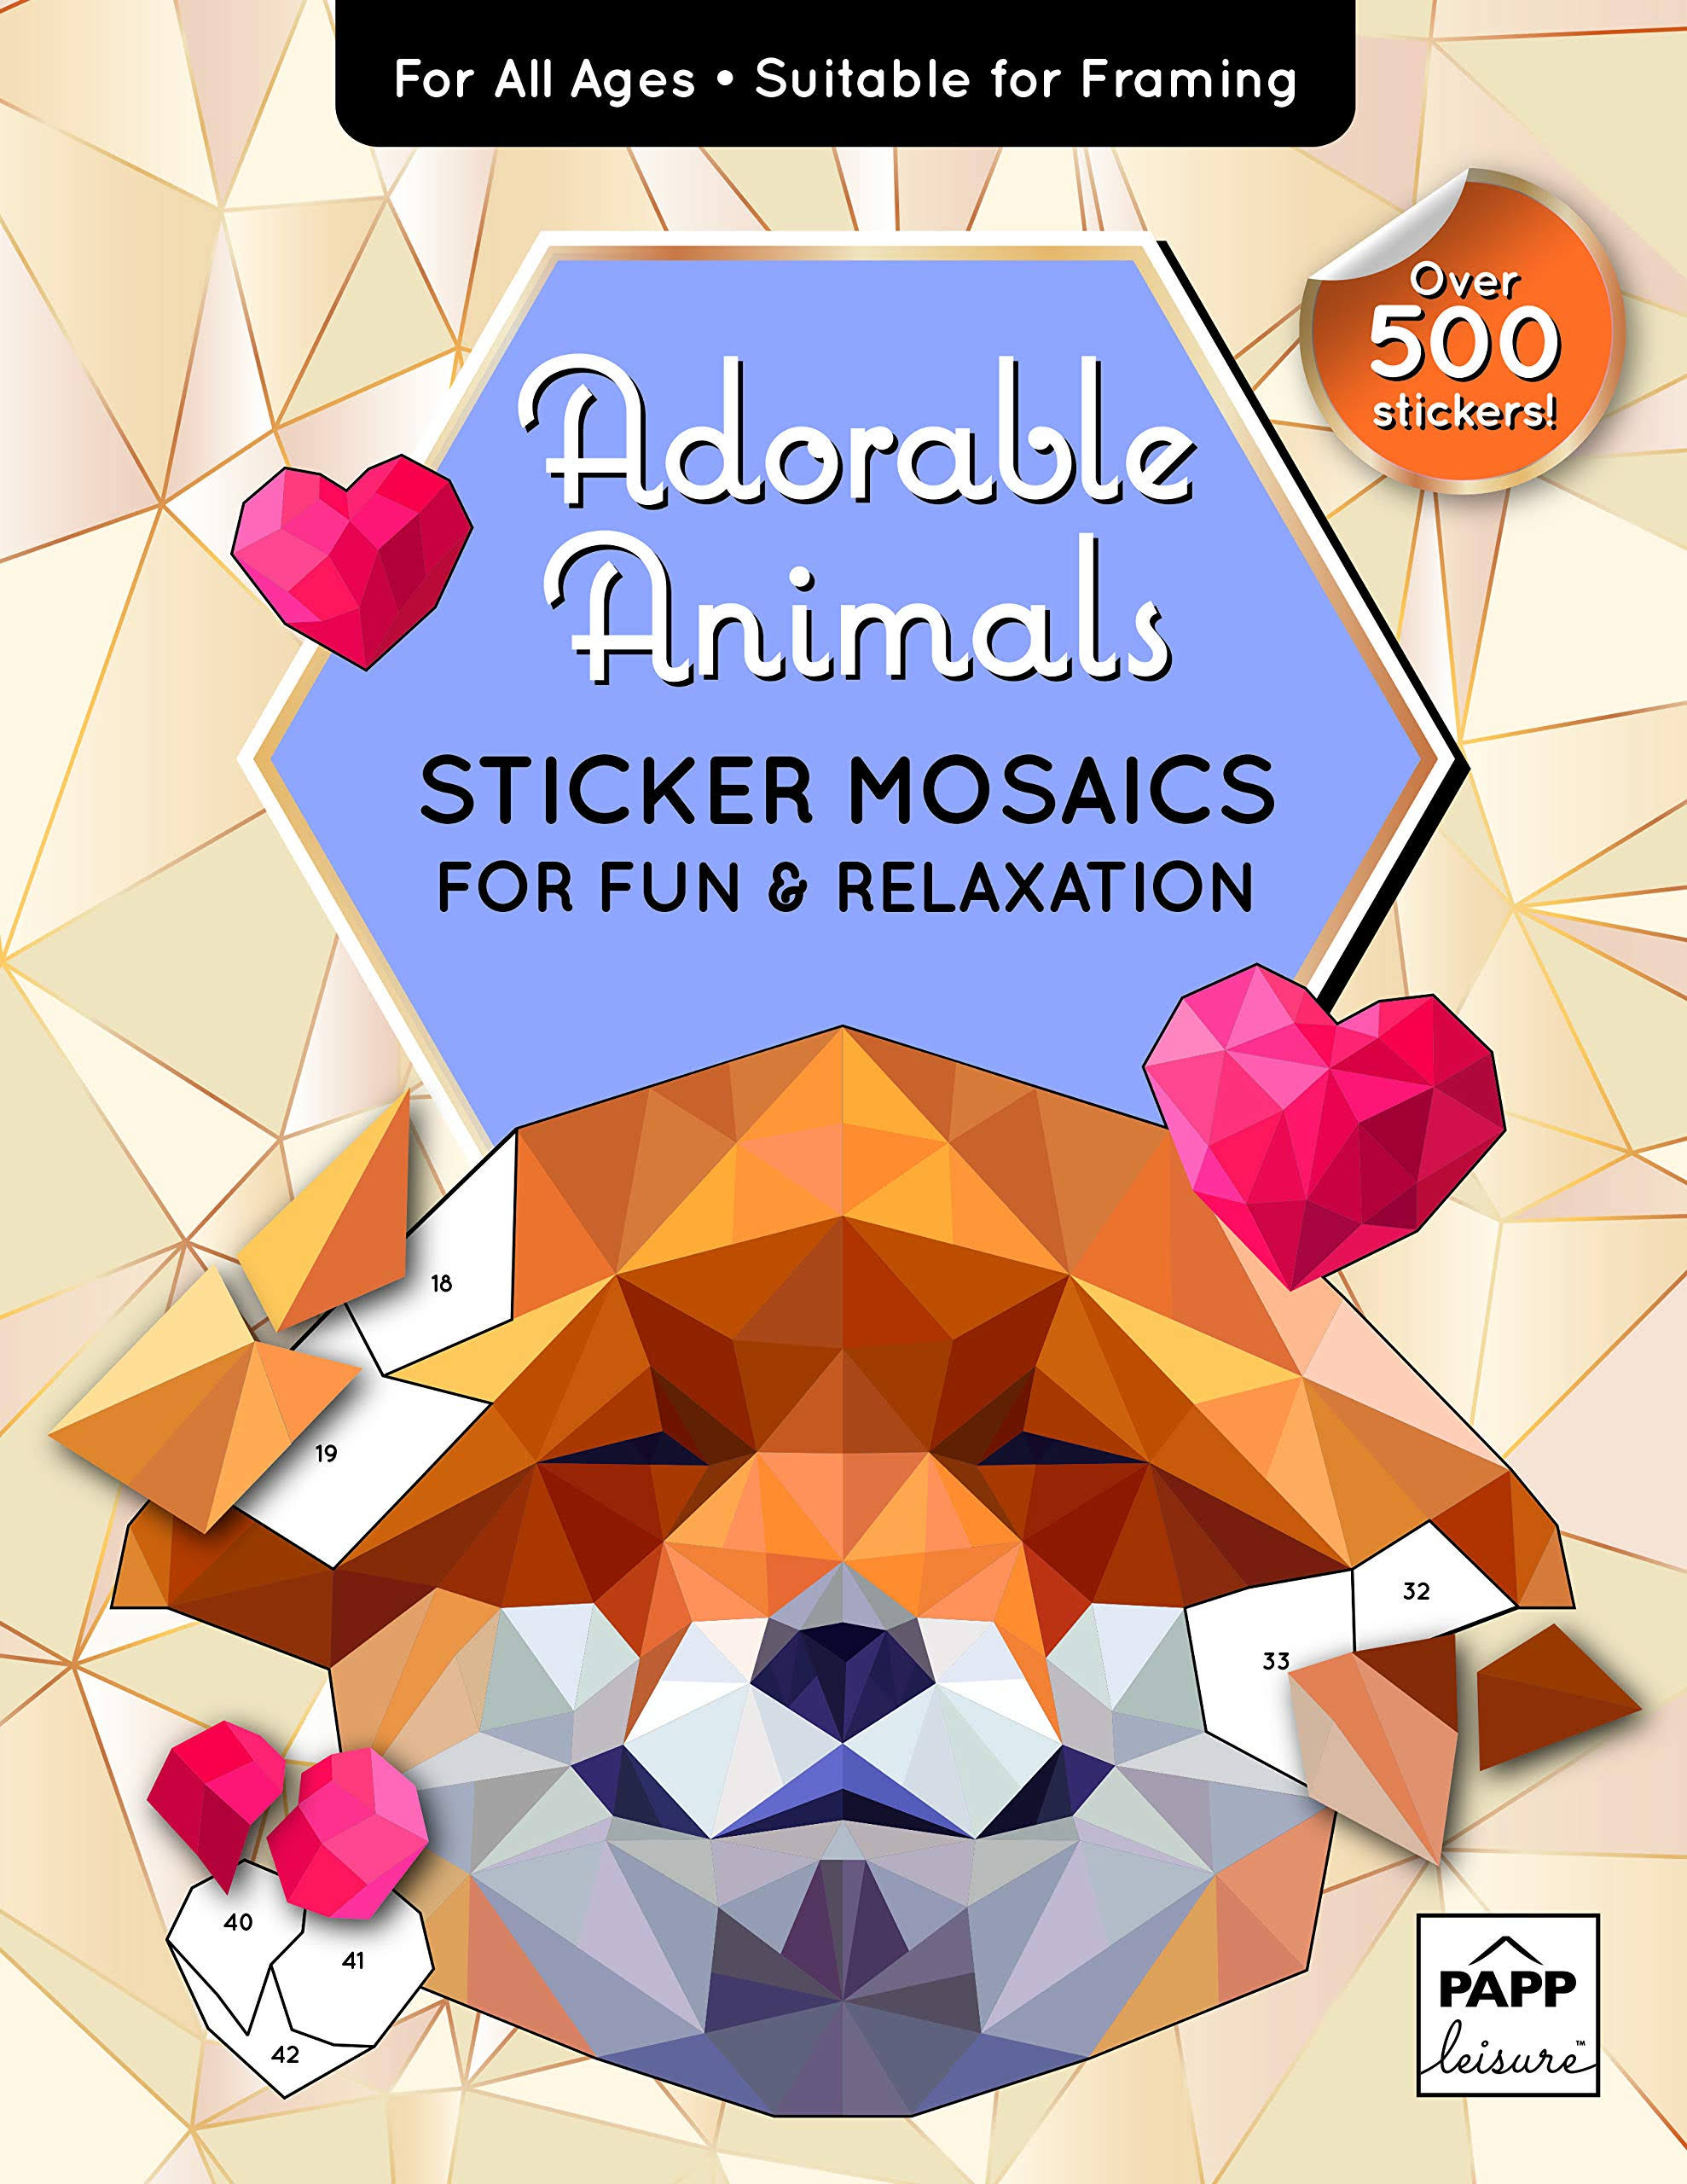 Sticker Mosaics - Adorable Animals by Papp Puzzles